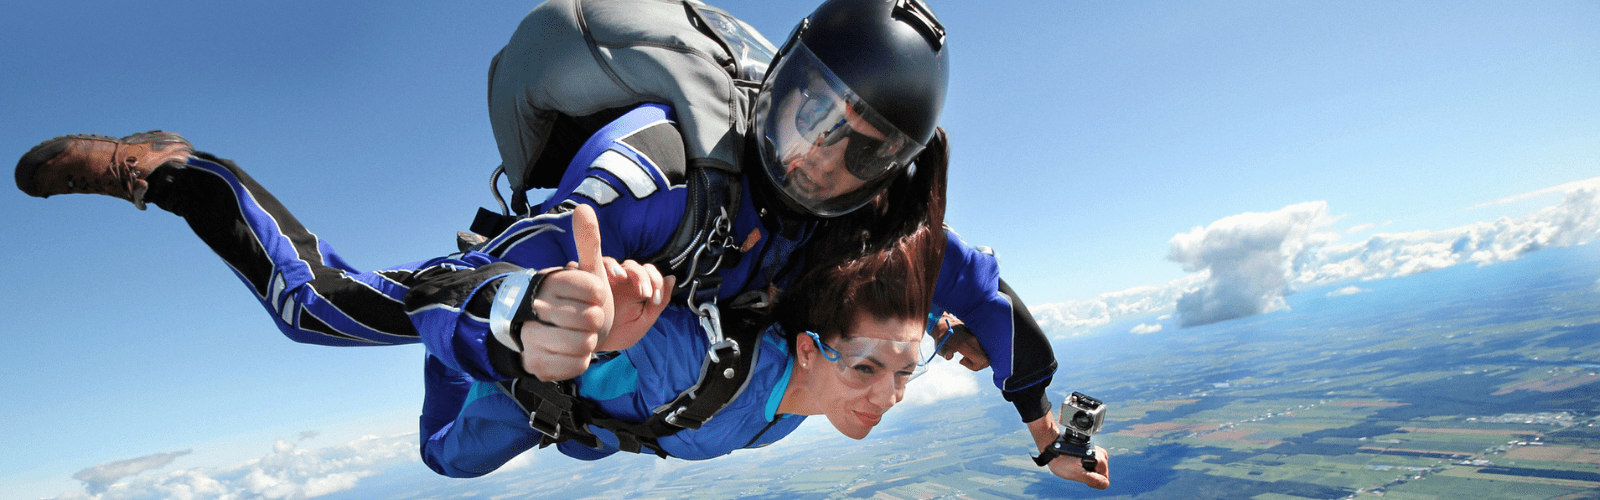 Skydive Day for Cancer Focus NI – 20th April